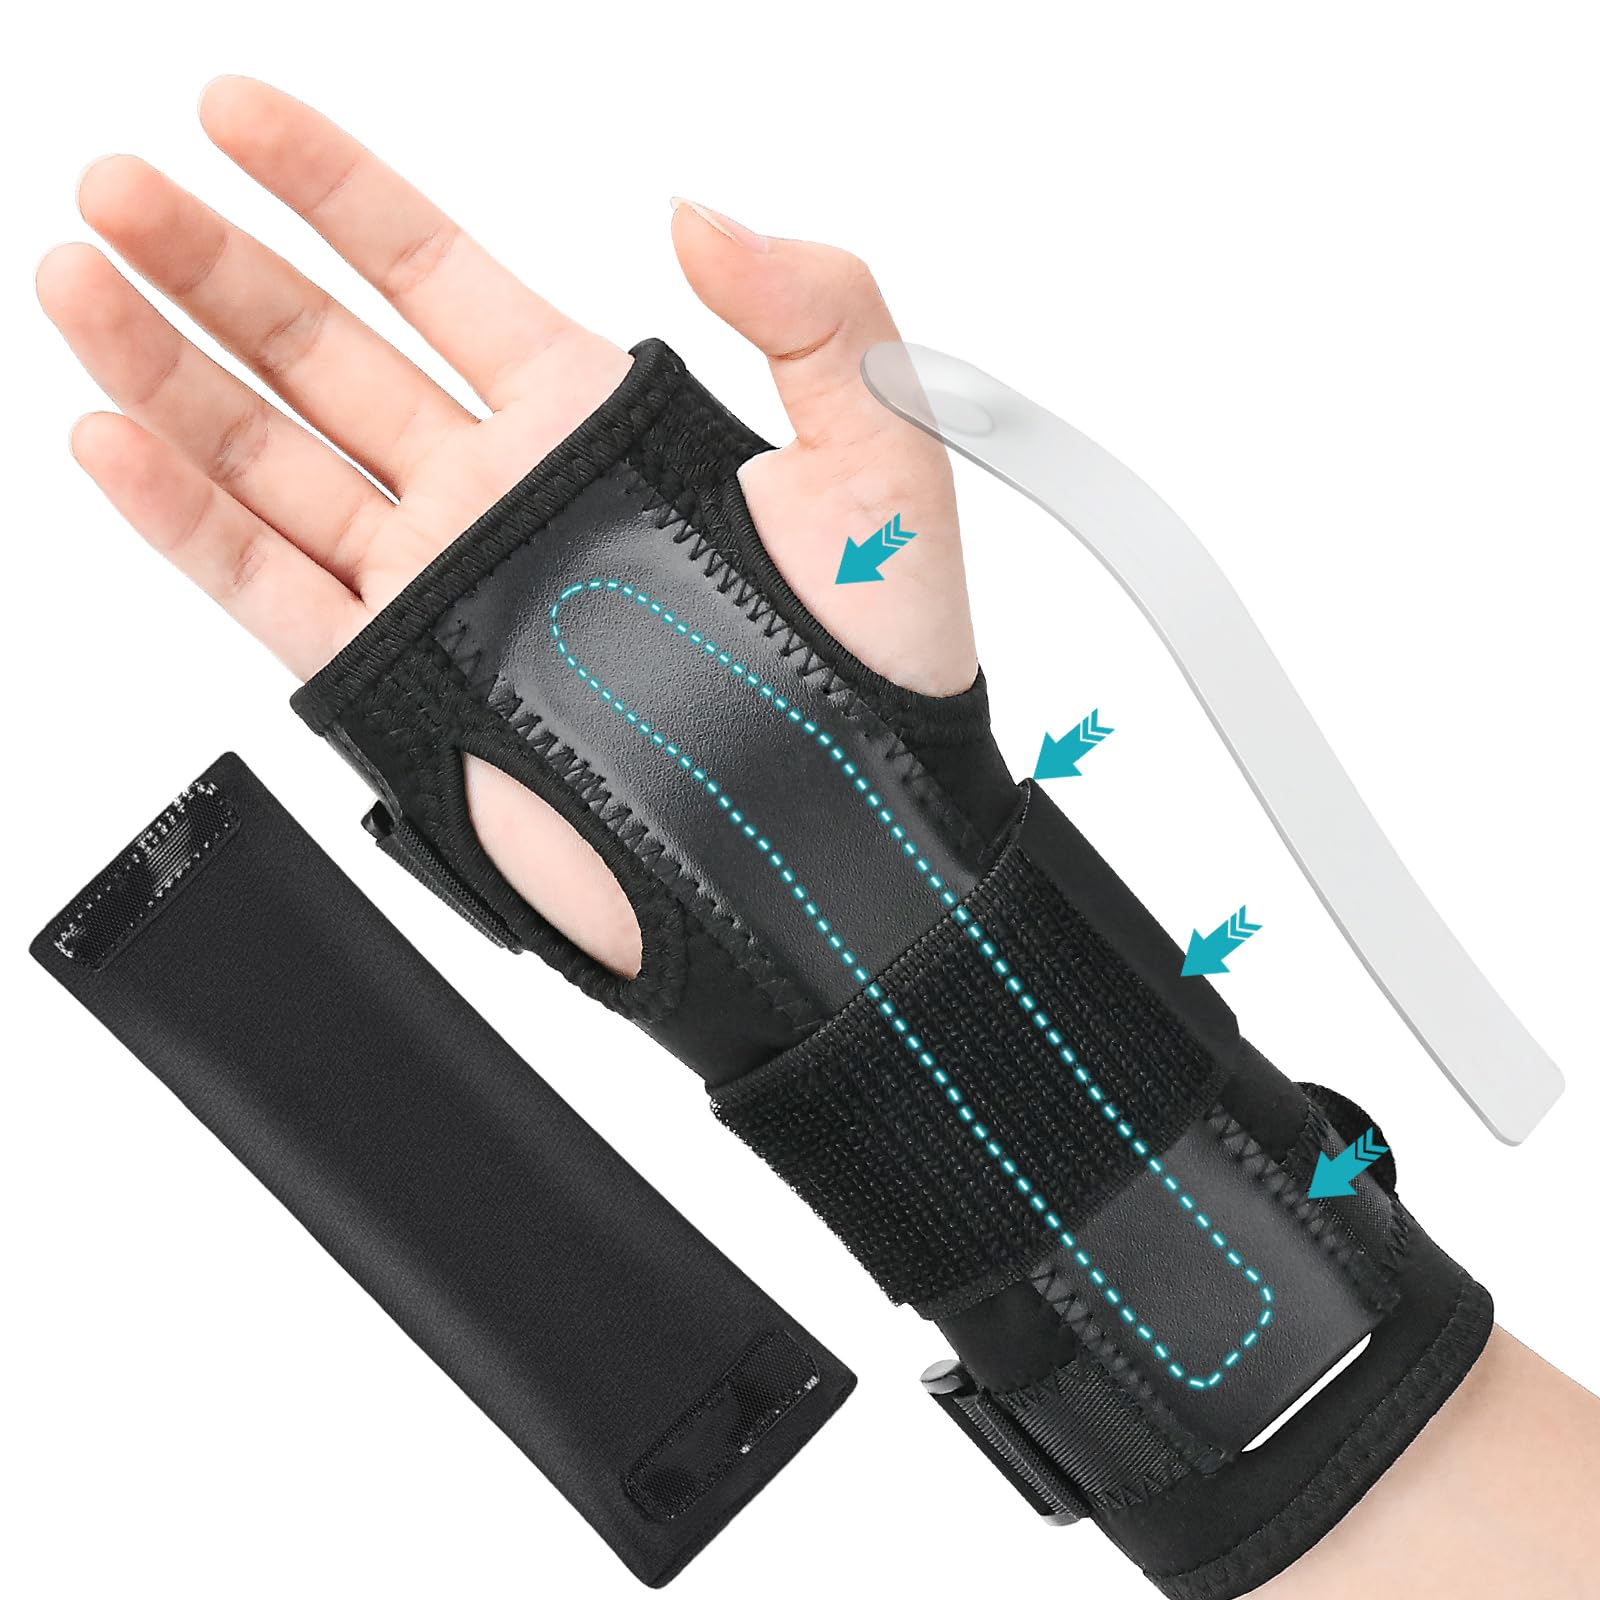 1Pcs Wrist Support Brace/Carpal Tunnel/Hand Support,Adjustable Wrist  Support for Arthritis and Tendinitis,Joint